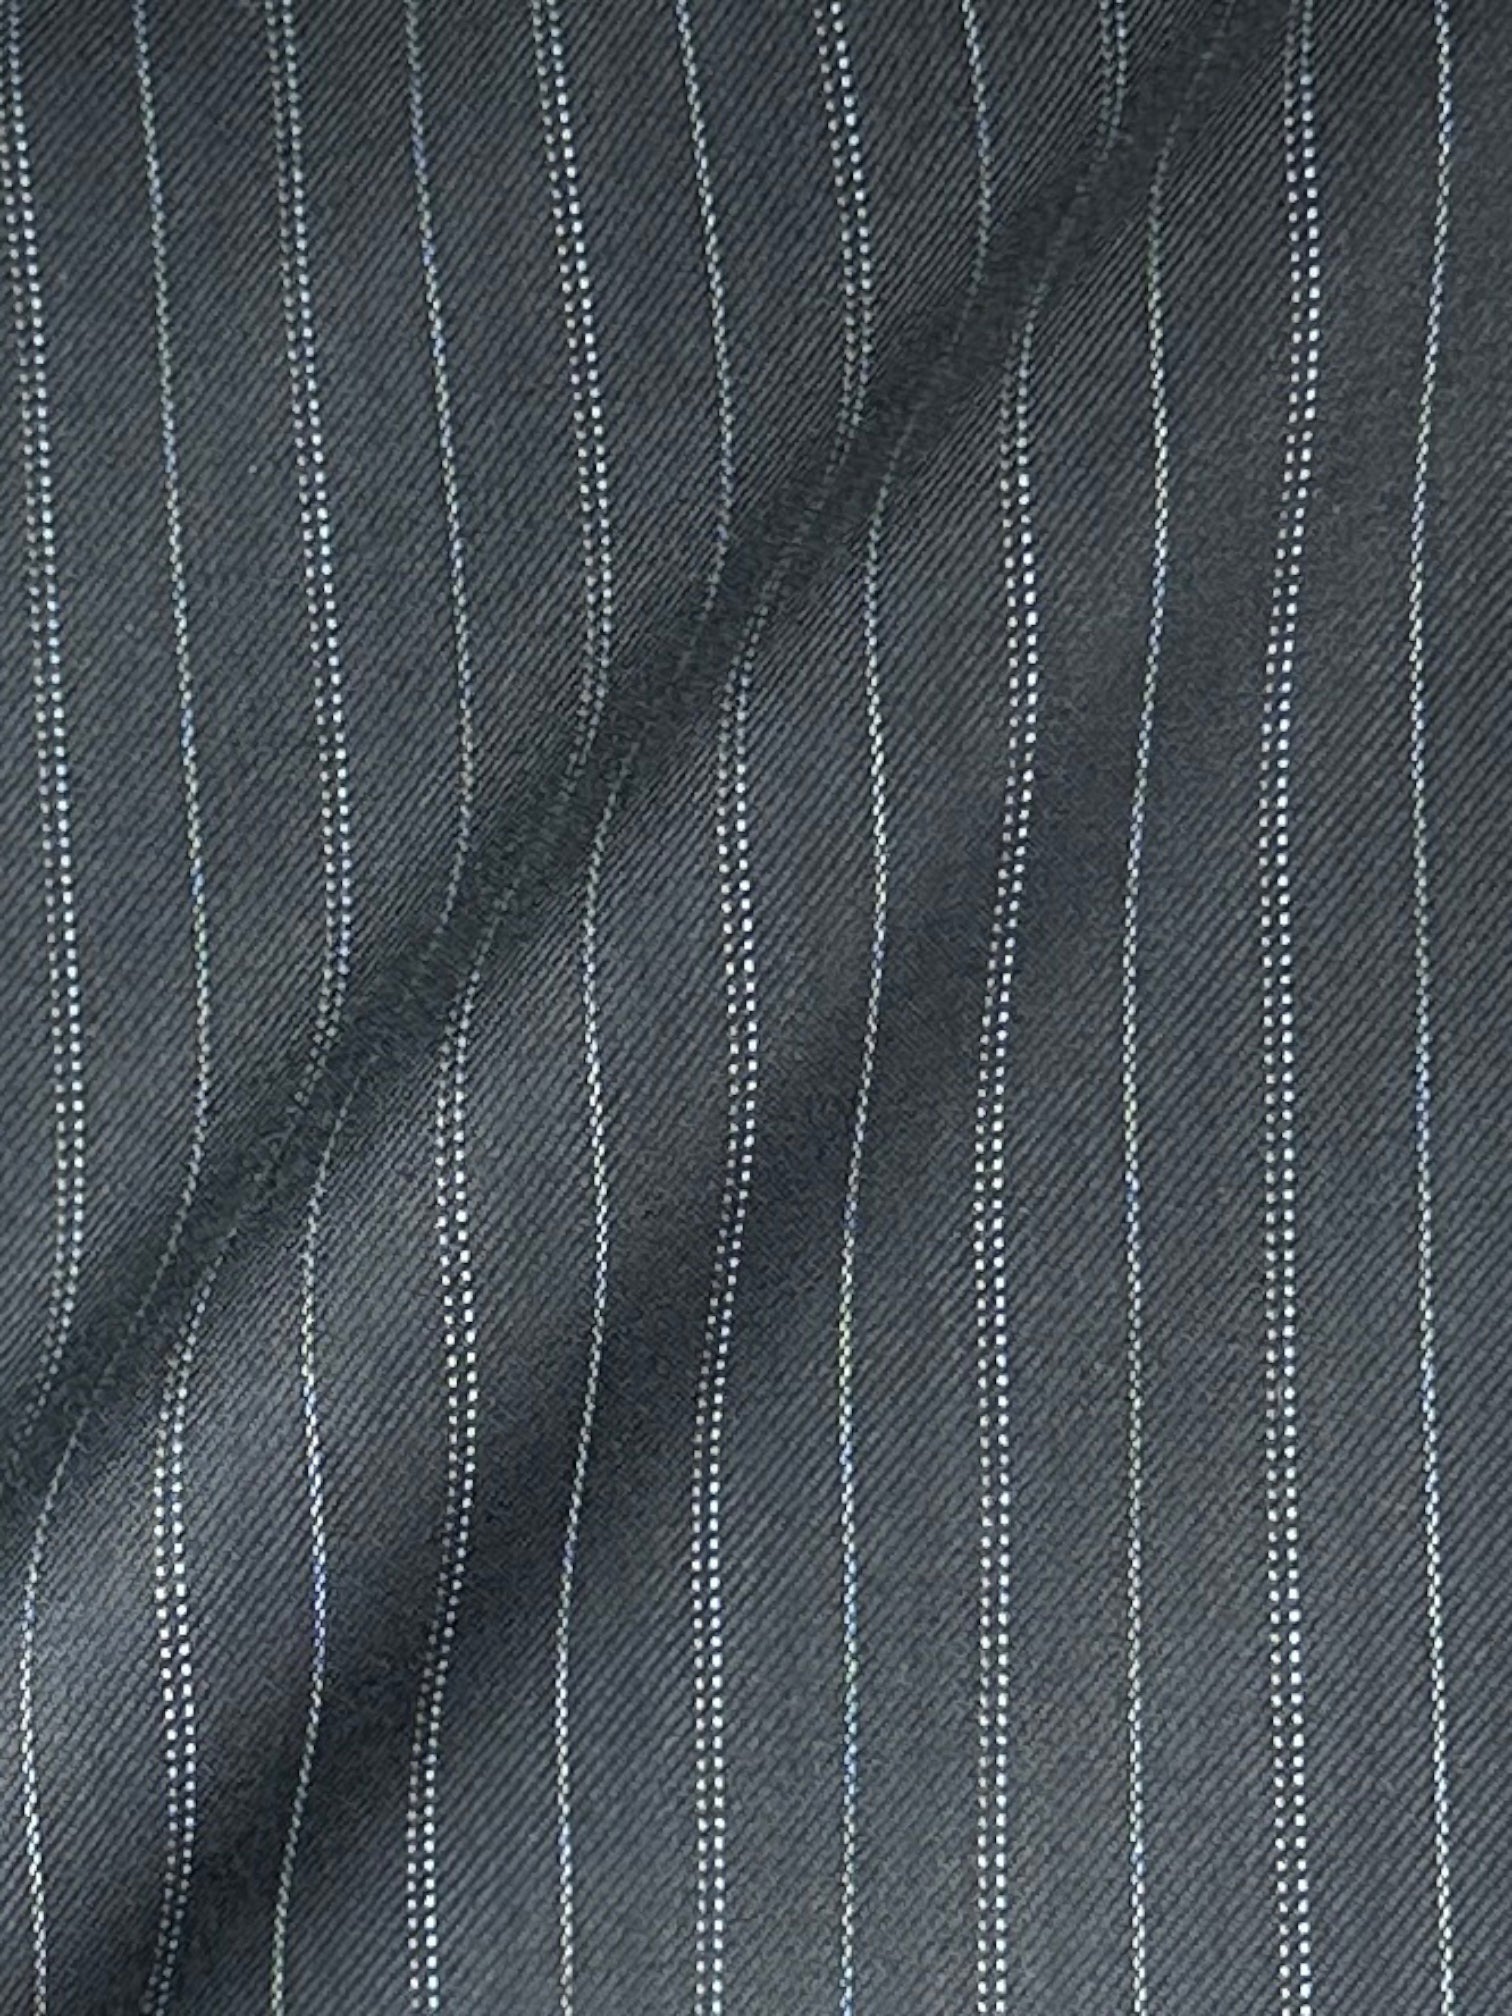 Canali Navy Super 150's Pinstripe Suit